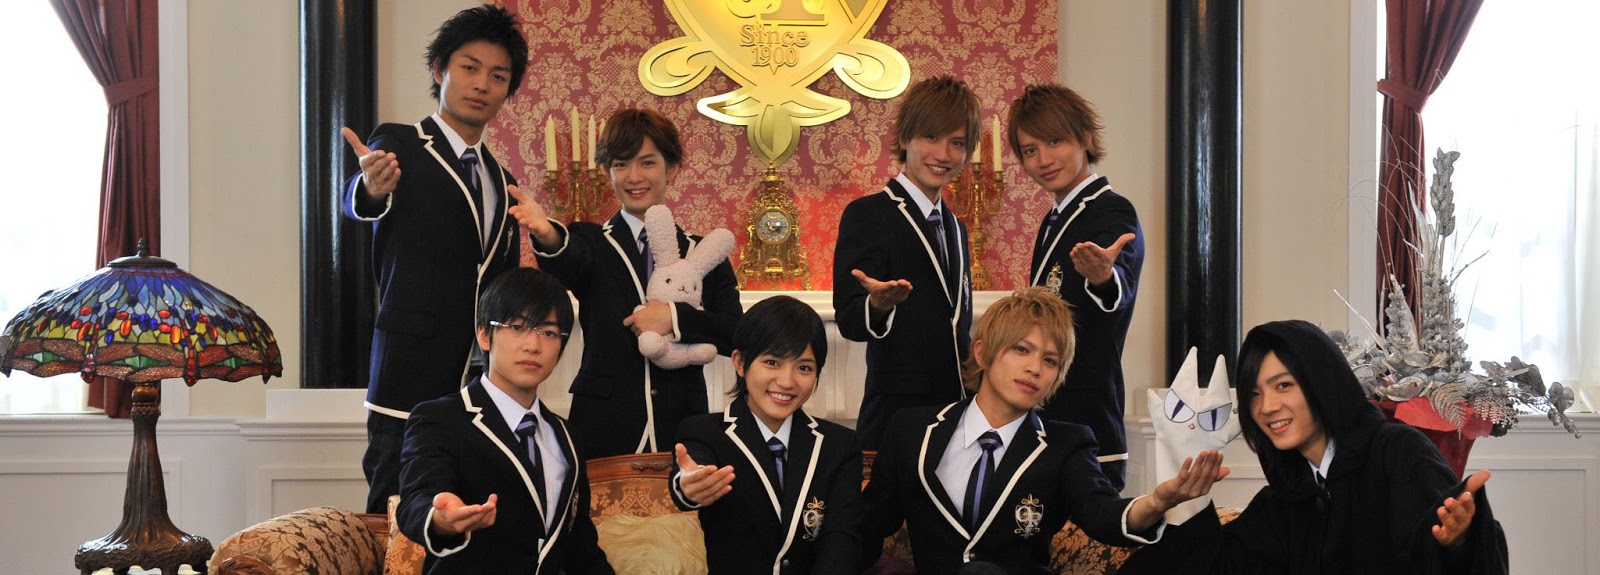 Ouran live action movie